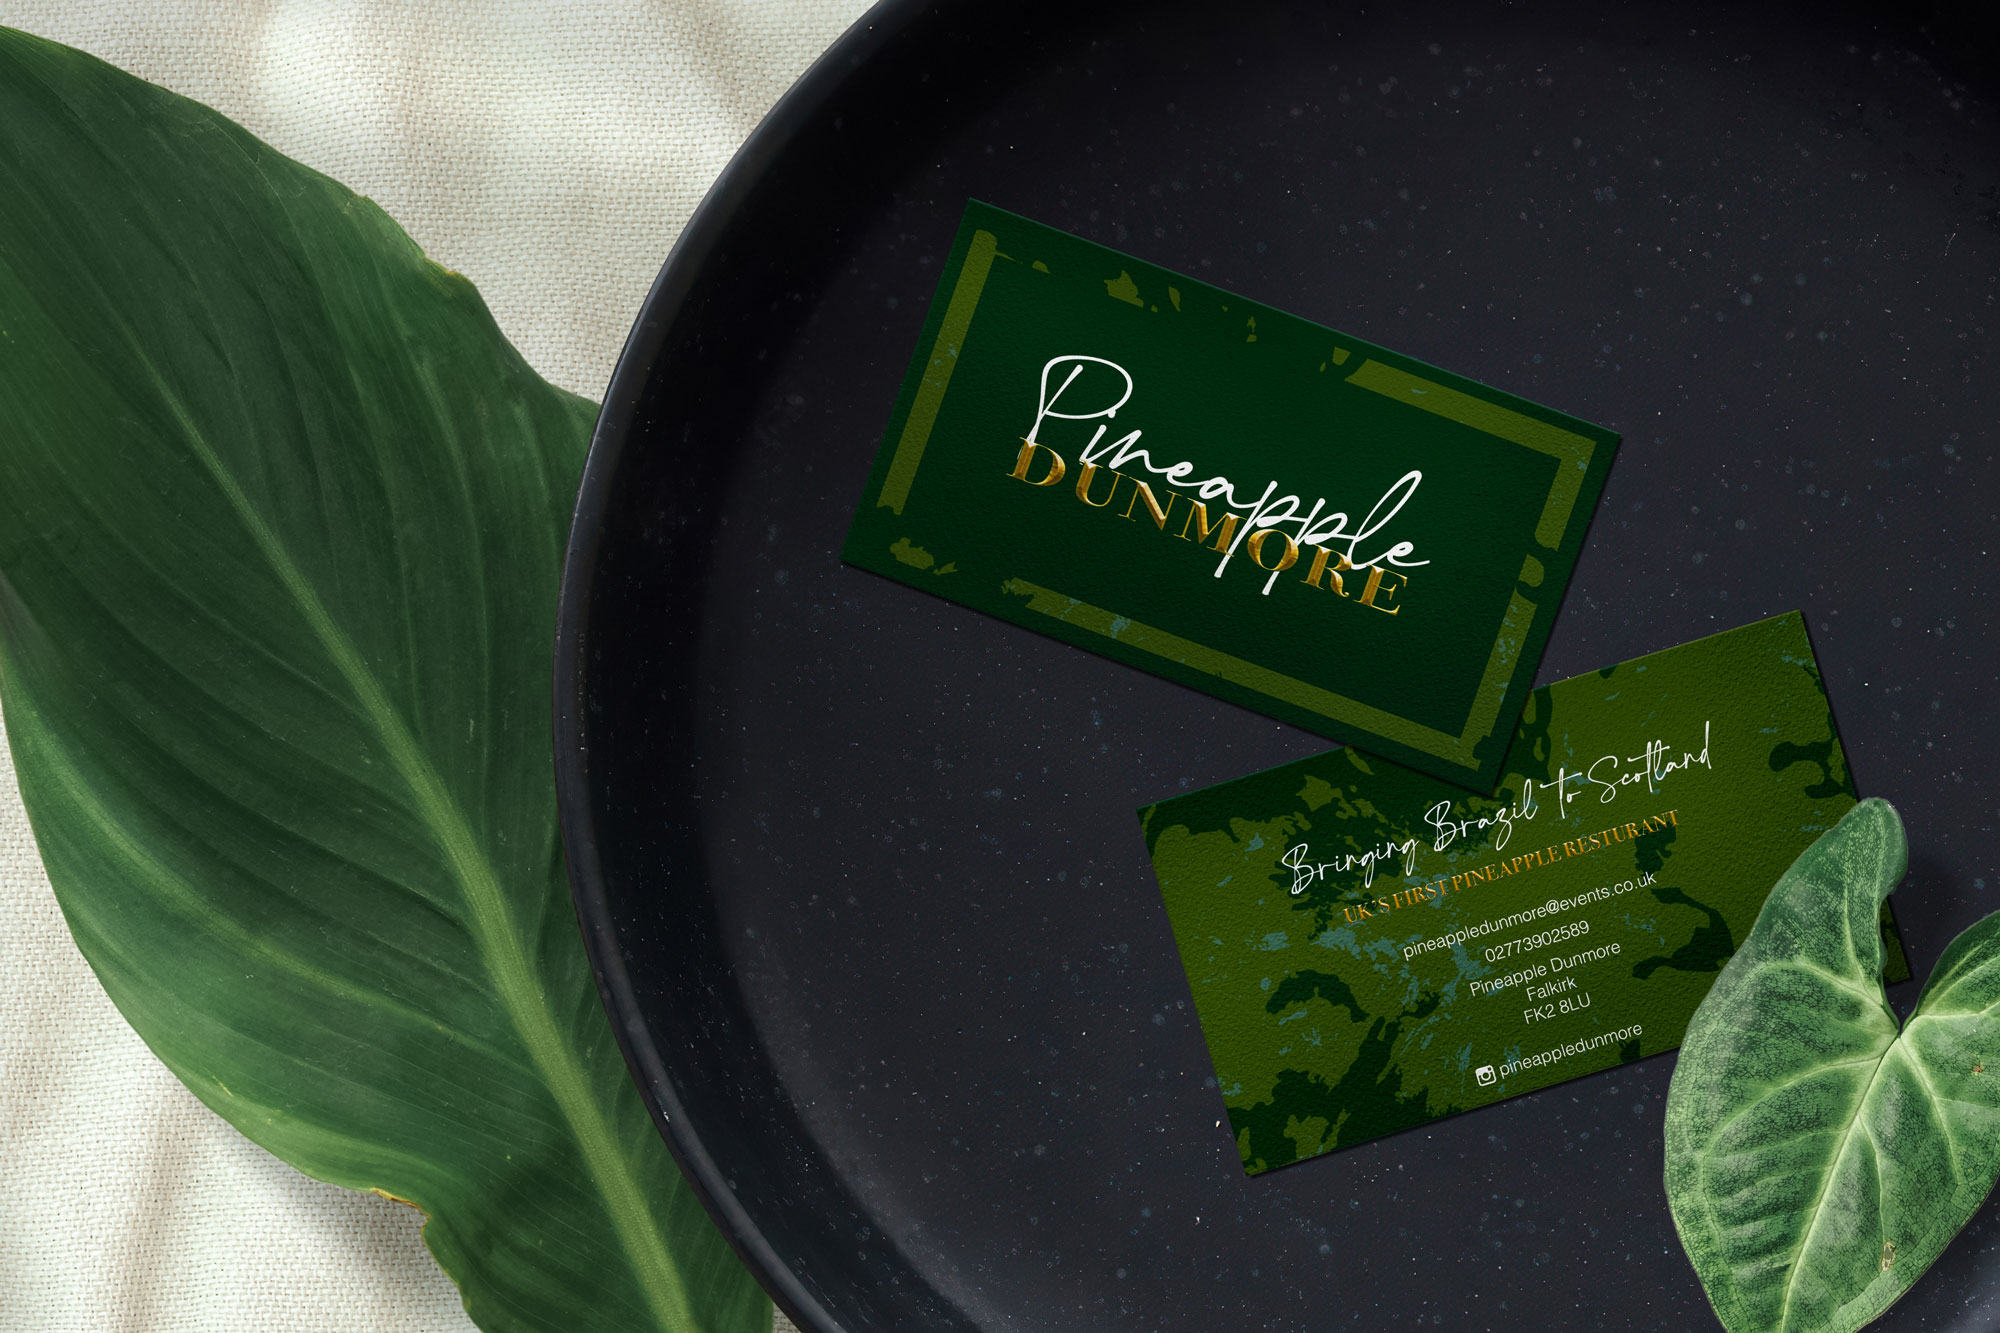 BA (Hons) Graphic Communication work by Chloe Bradbrook showing "Pineapple Dunmore" restaurant identity, business card coloured green with botanical decoration